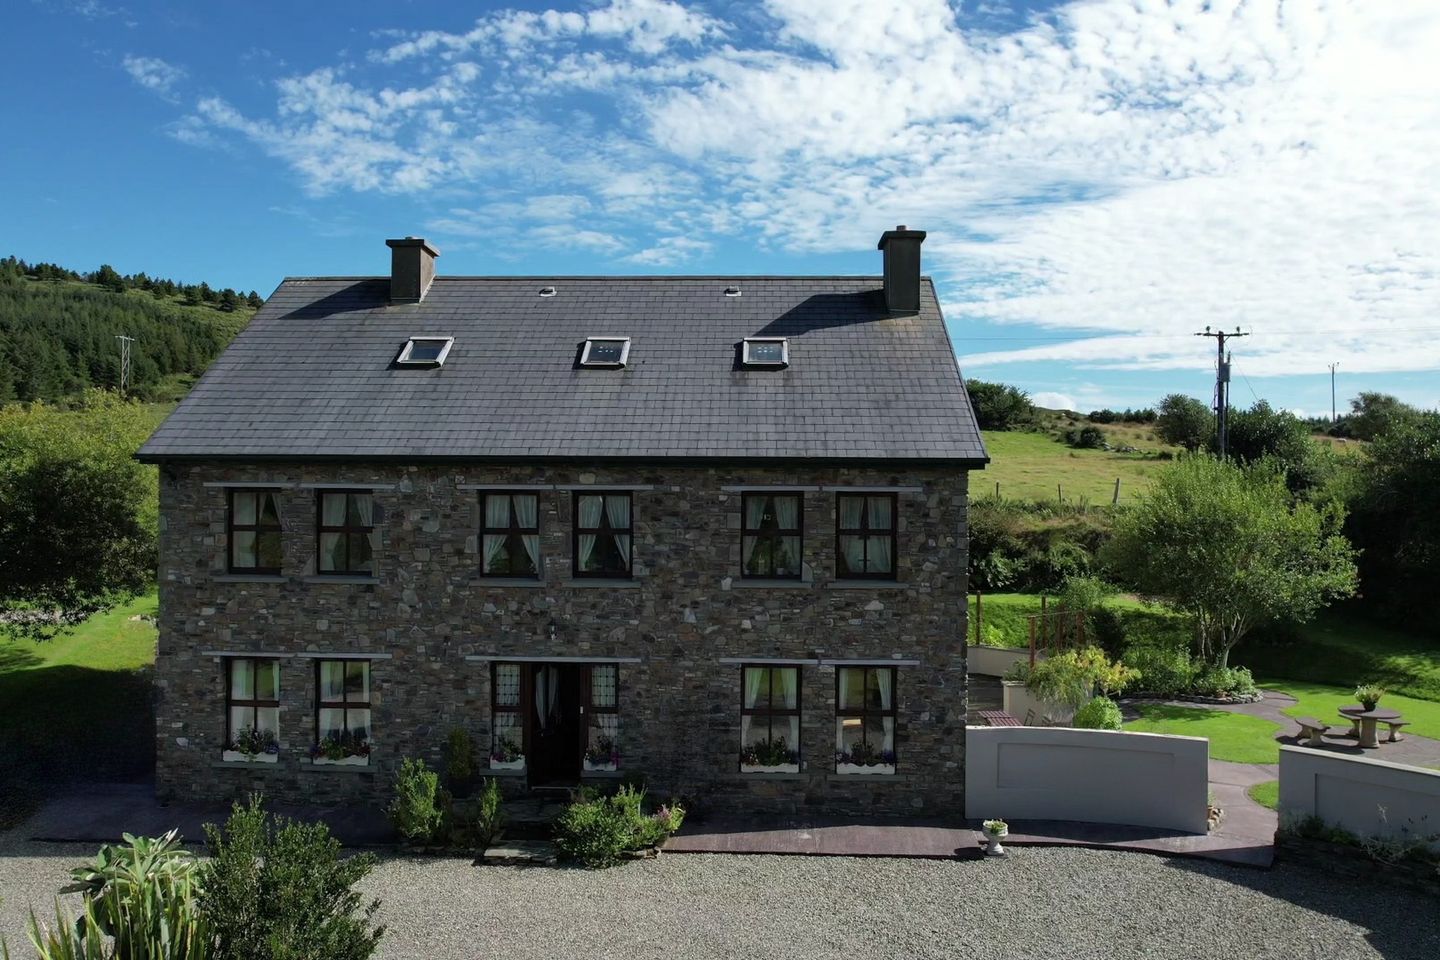 WATERLANDS COUNTRY RETREAT, Waterlands Country Retreat, Coorycommane, Bantry, Co. Cork, P75AX73